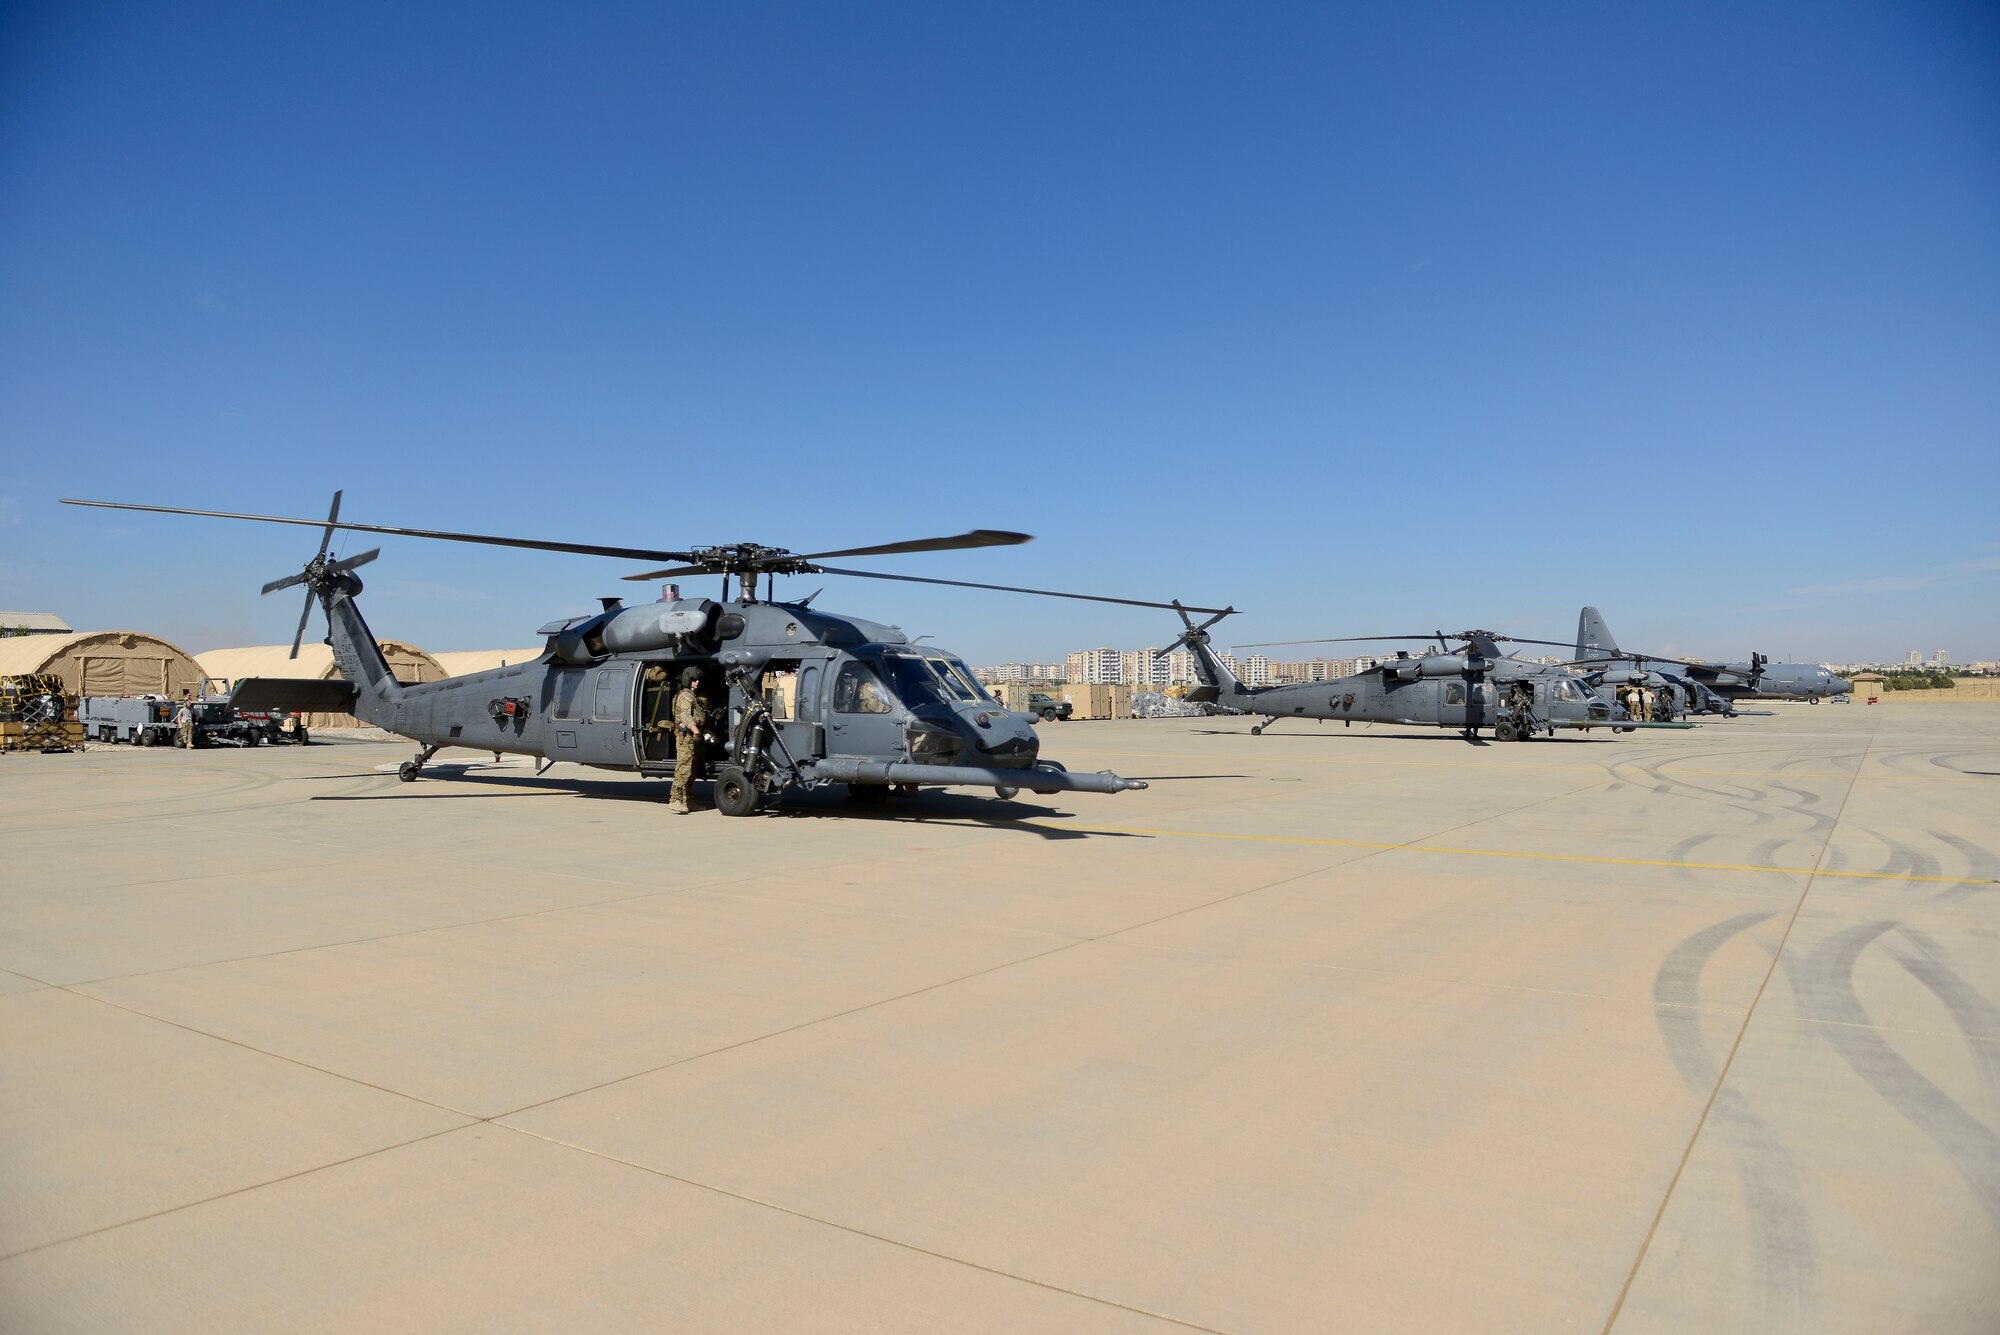 Two HH-60G Pave Hawk Helicopters sit on the flight line at Diyarbakir Air Base, Turkey Oct. 1, 2015. U.S. Air Forces Central Command has begun staging small detachments of aircraft and Airmen at Diyarbakir AB in southeast Turkey to enhance Coalition capabilities. When requested, the helicopters will personnel provide recovery support to protect and recover Coalition members. (U.S. Air Force photo by Airman 1st Class Cory Bush)